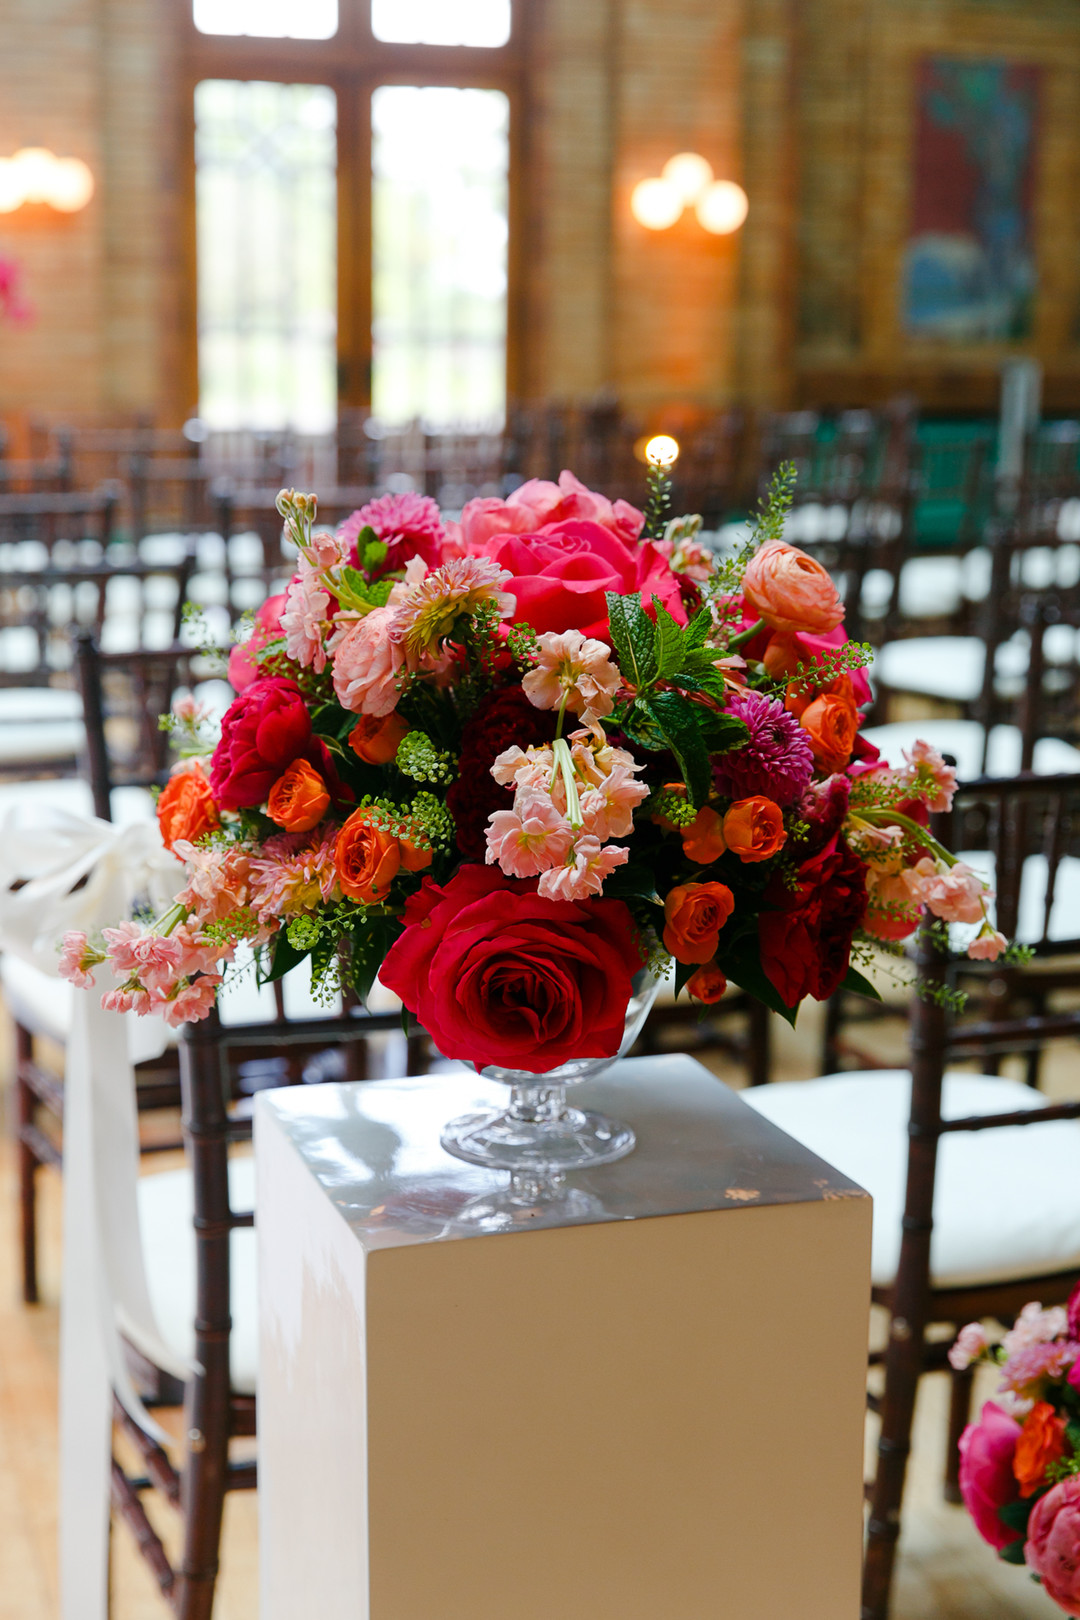 Pink and red wedding flowers: Timeless and colorful Chicago wedding in Lincoln Park captured by StudioThisIs. See more wedding ideas at CHItheeWED.com!